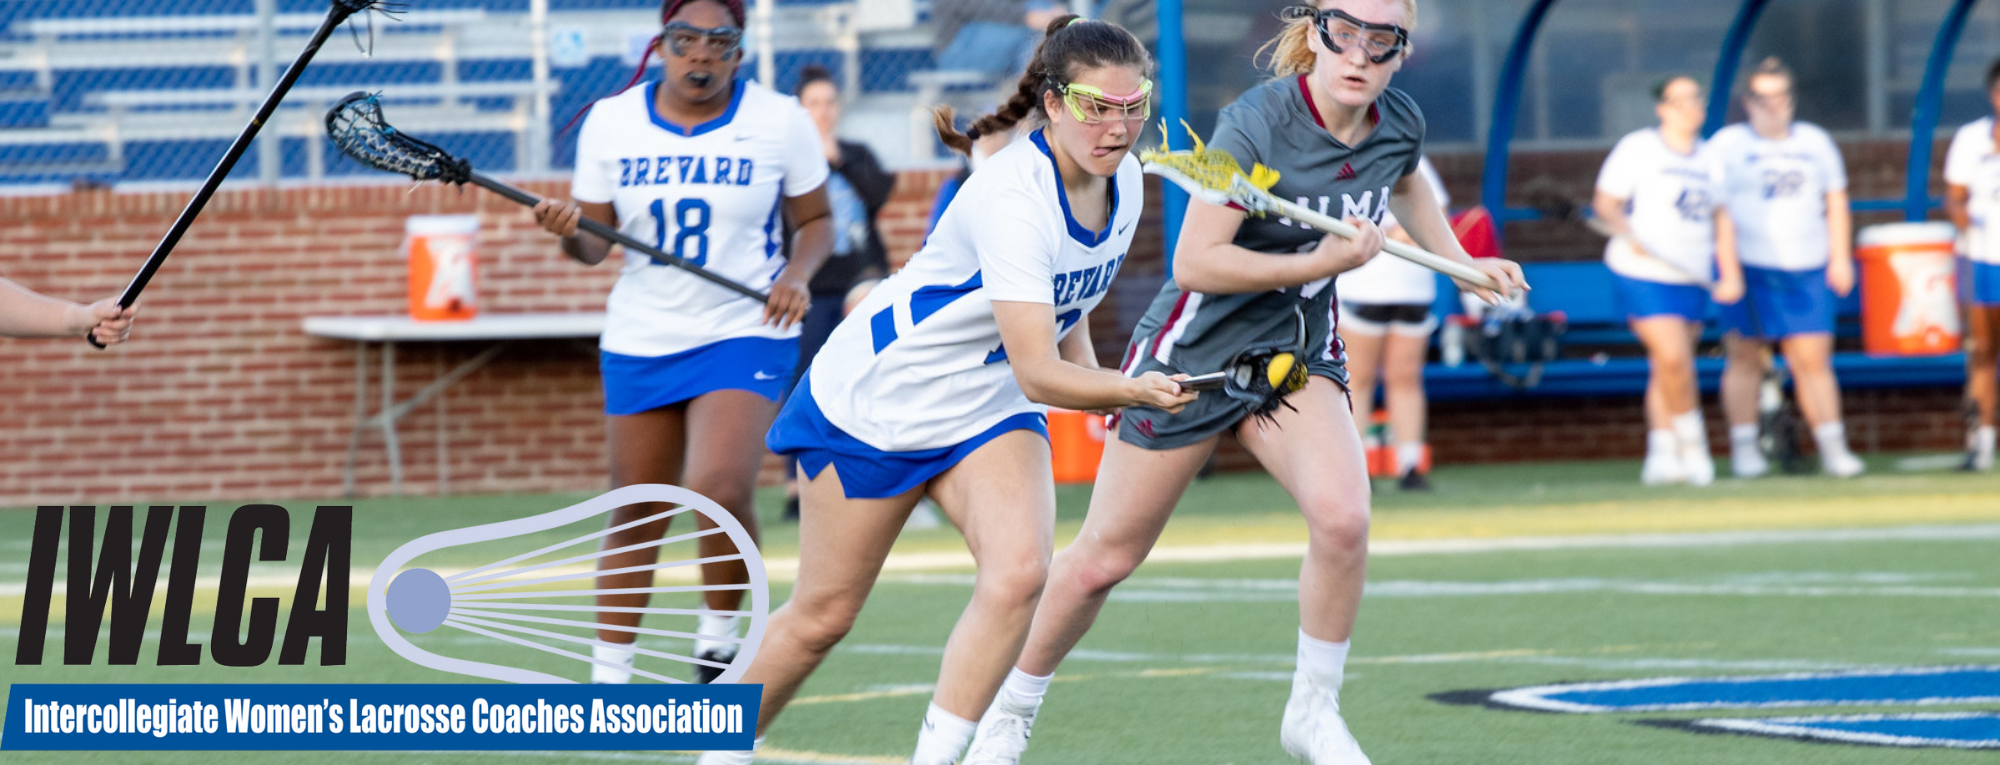 Moore Secures Program’s First National Player of the Week Honor from IWLCA